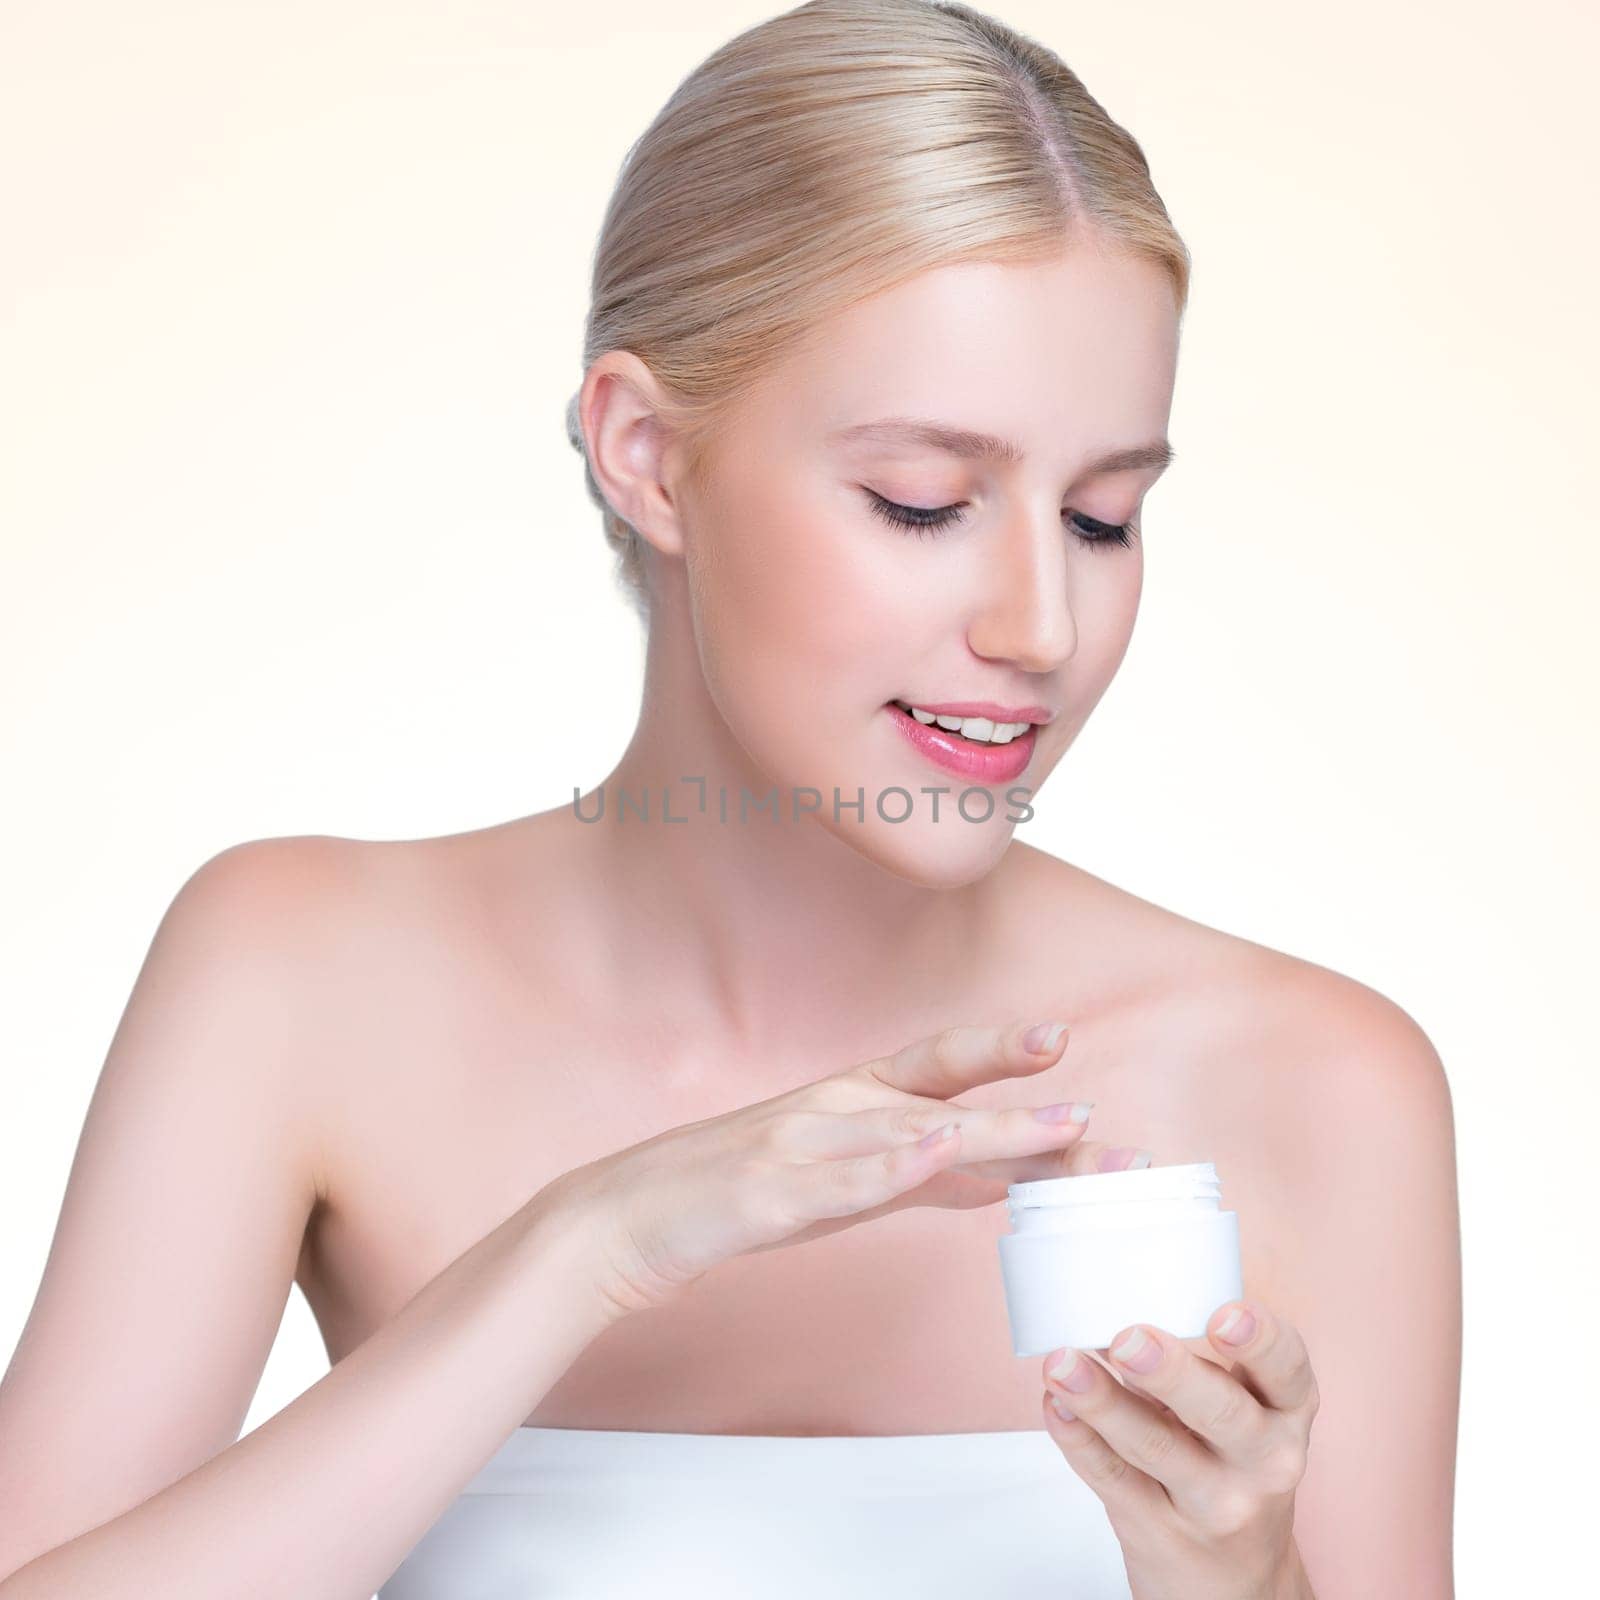 Personable perfect skin woman holding mockup moisturizer product. by biancoblue